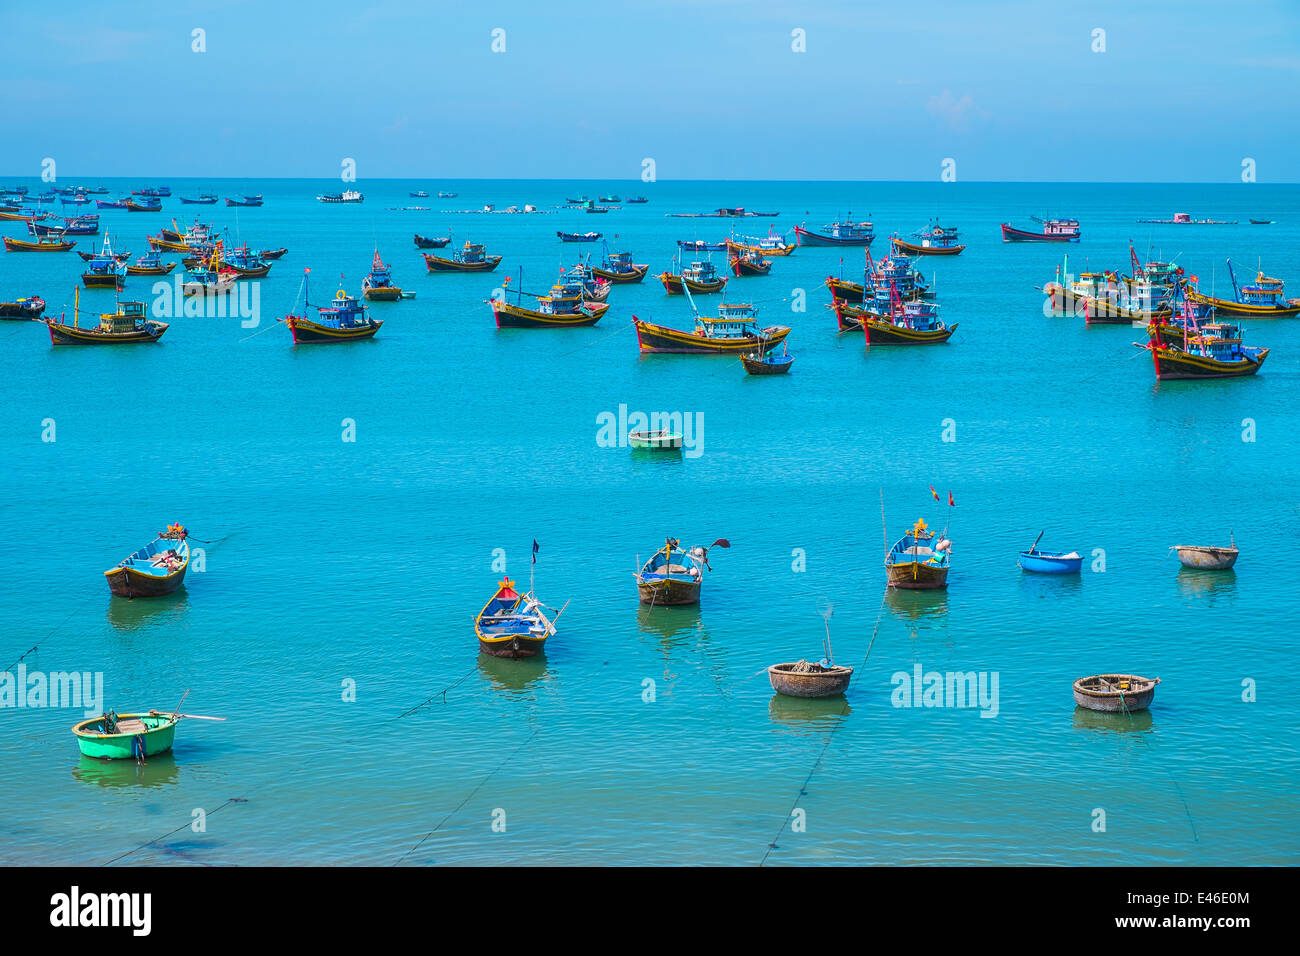 Many traditional boats in fishing village, Vietnam, Southeast Asia Stock Photo